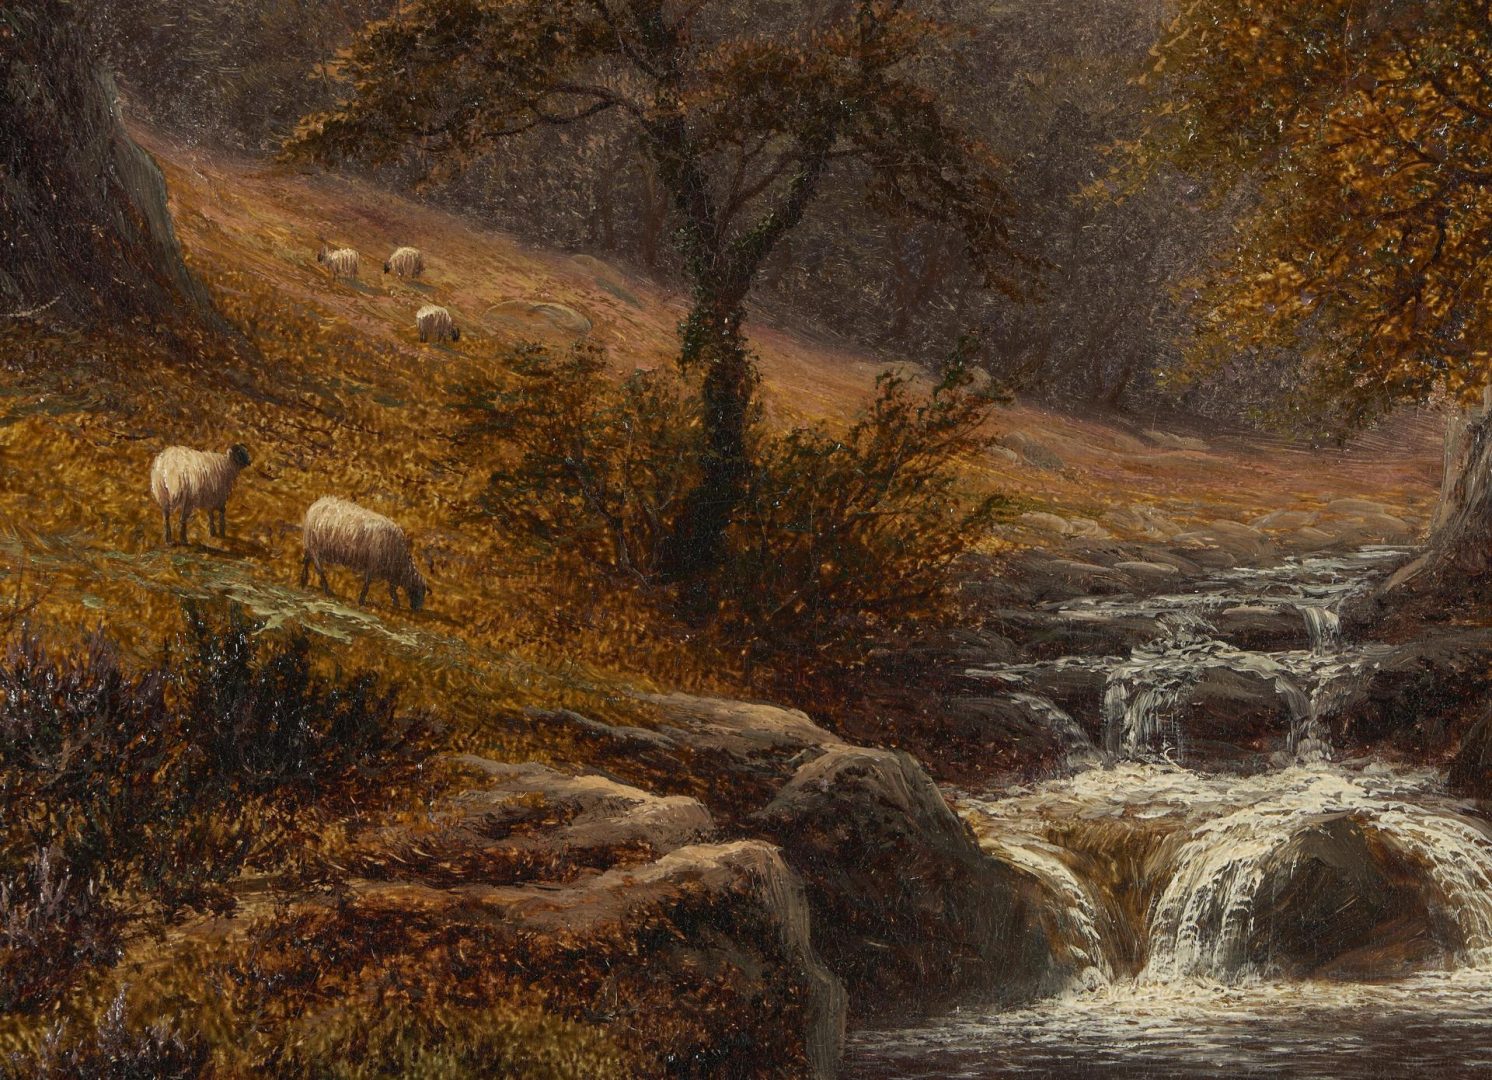 Lot 263: William Mellor Oil Landscape Painting, On the Lledr, North Wales